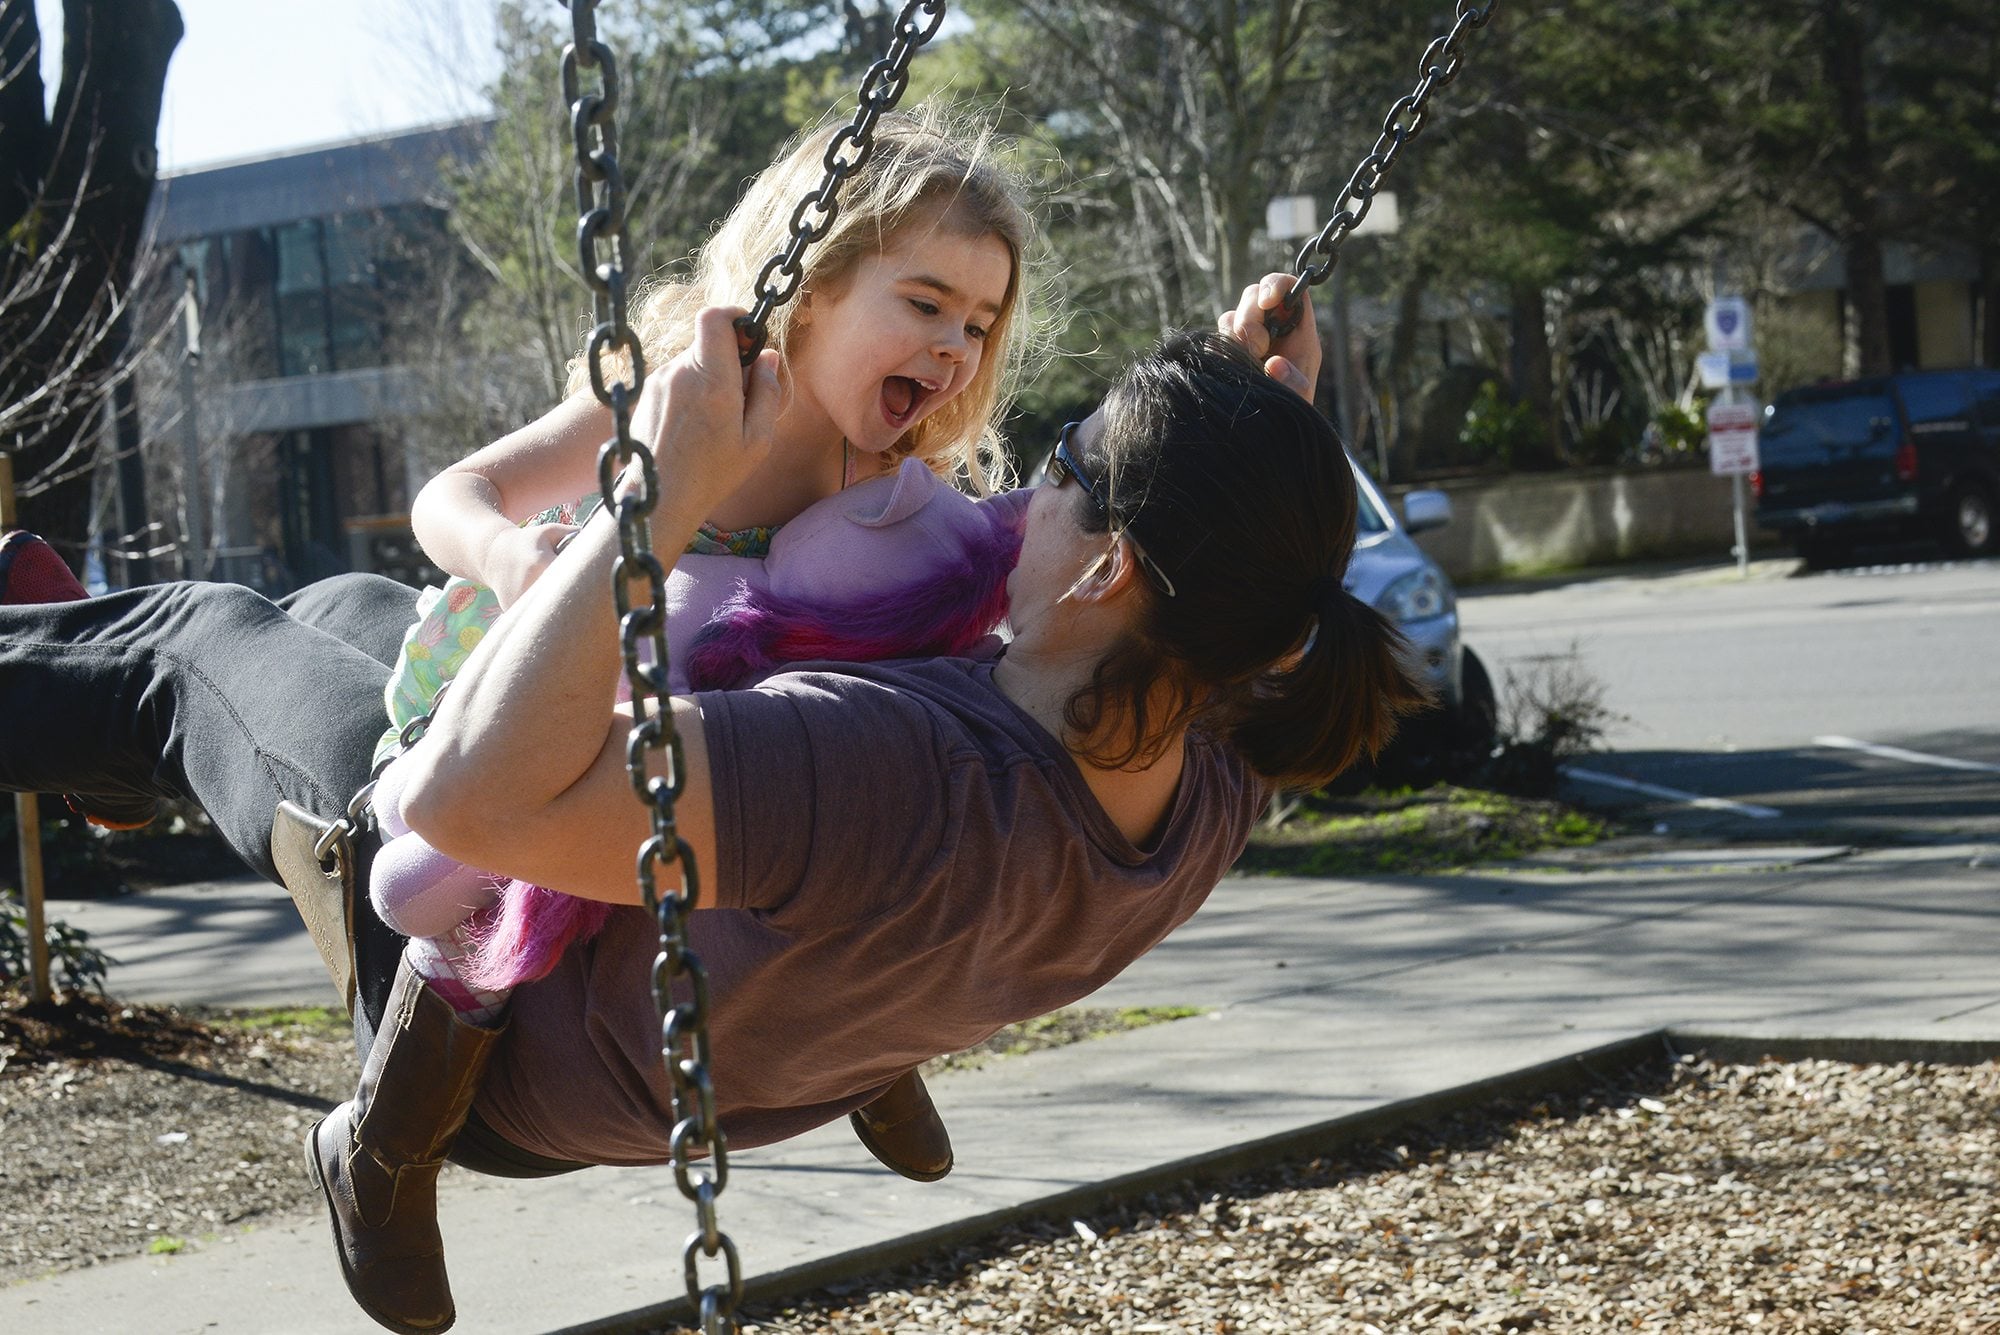 Jocelyn Leonard-Ulrich, 4, swings with her mother, Melissa Ulrich, on Monday at Esther Short Park in downtown Vancouver. Jocelyn has been learning how to use a swing set, her mother said.